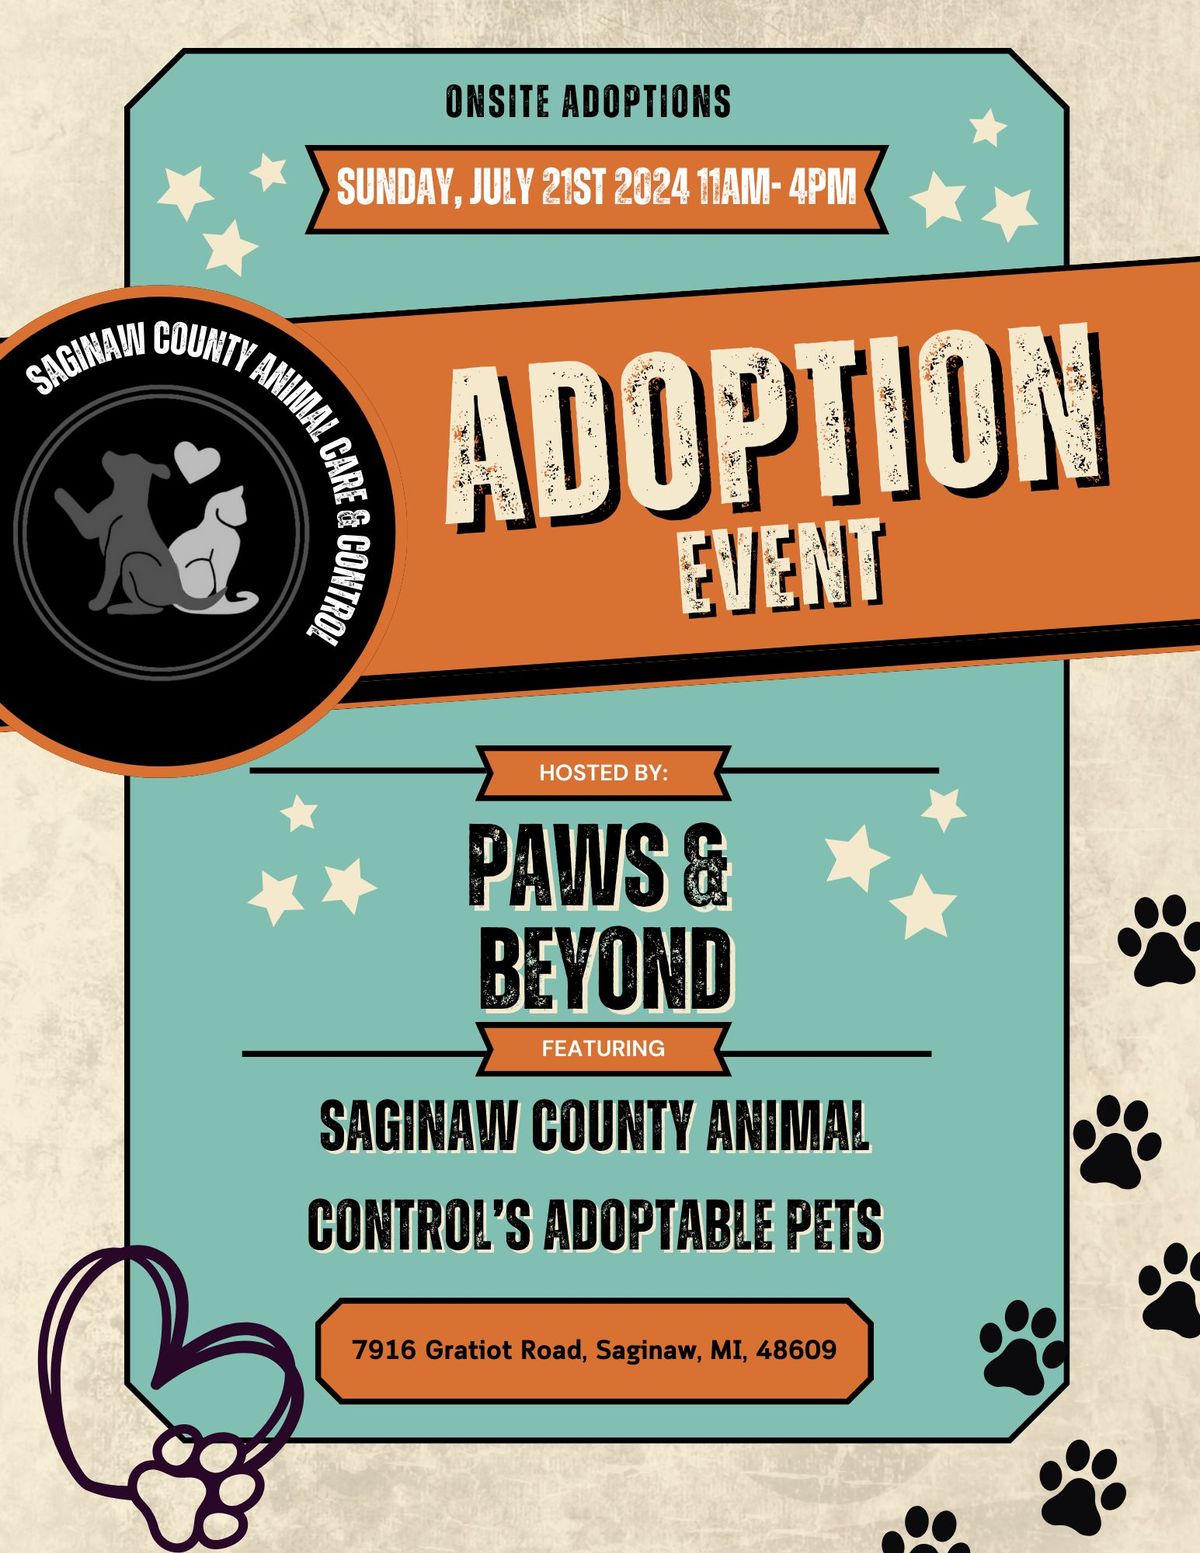 SCACC Adoption Event Hosted By: Paws & Beyond